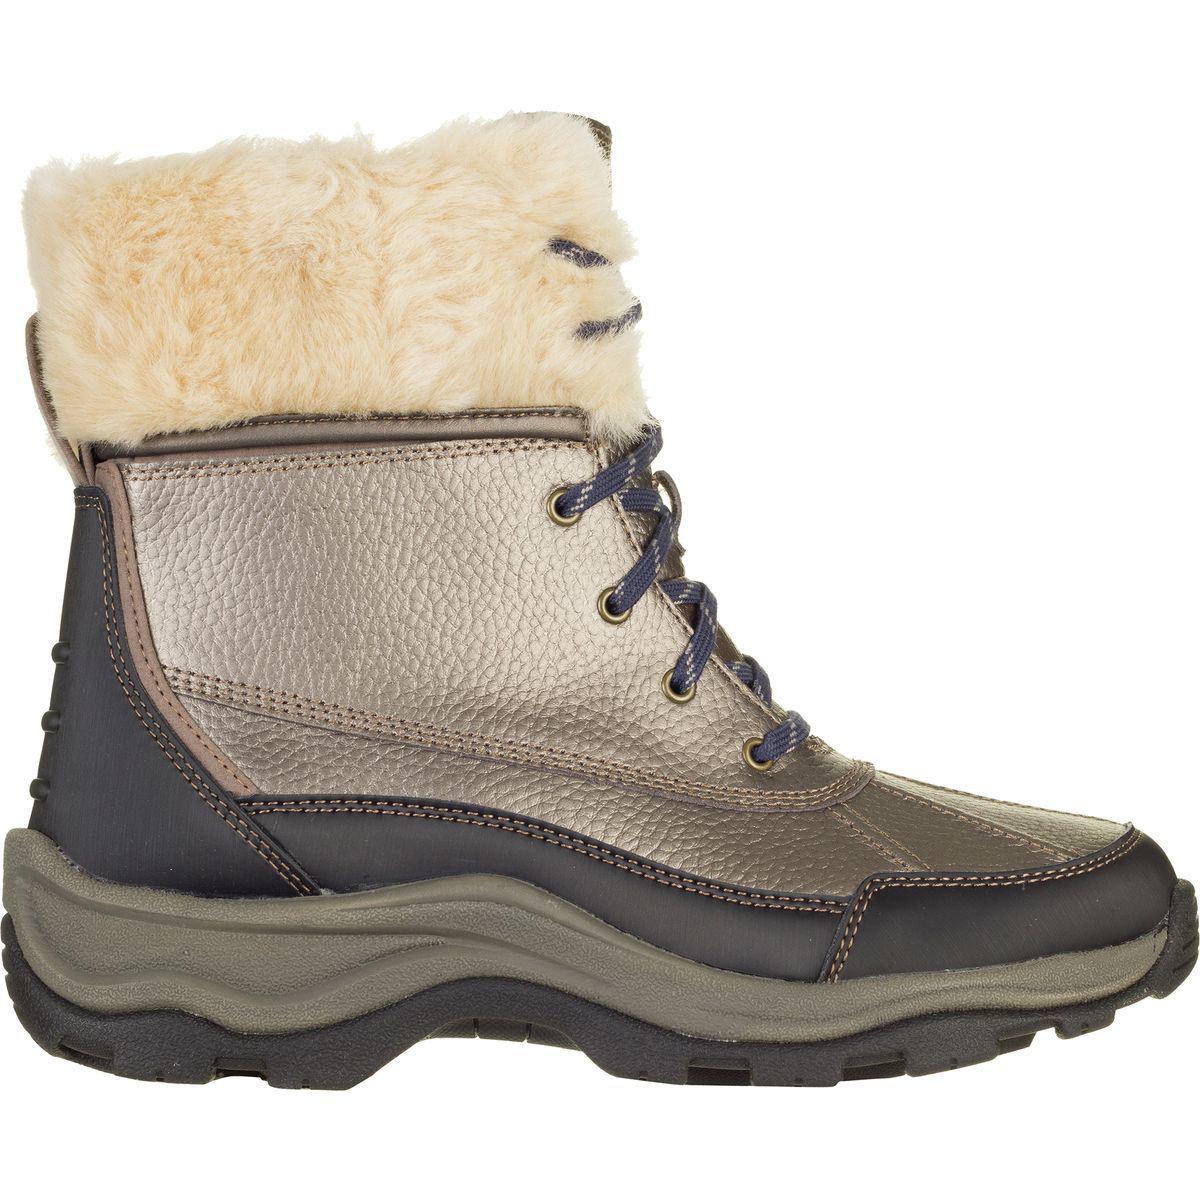 clarks mazlyn arctic waterproof, Up to 